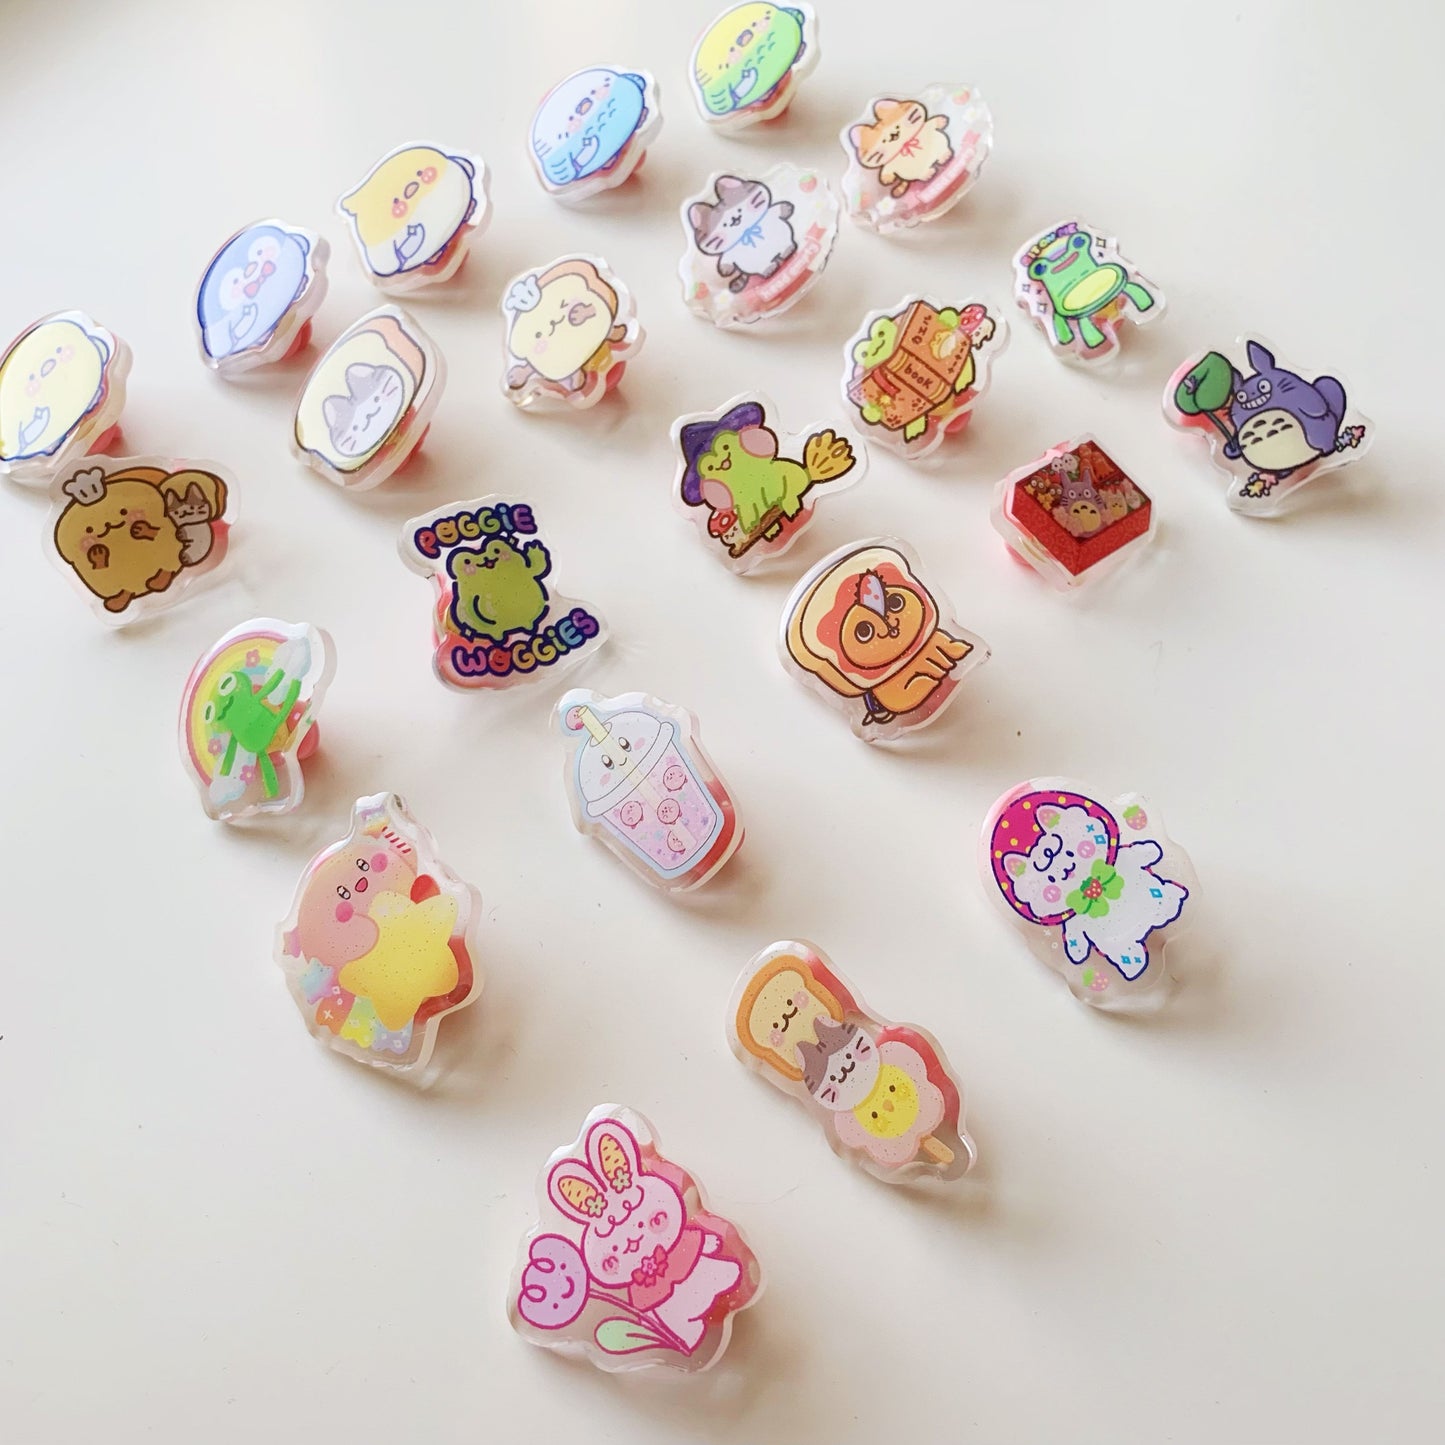 Assorted 1.5” Acrylic Pins (Only Available to Canada Customers)